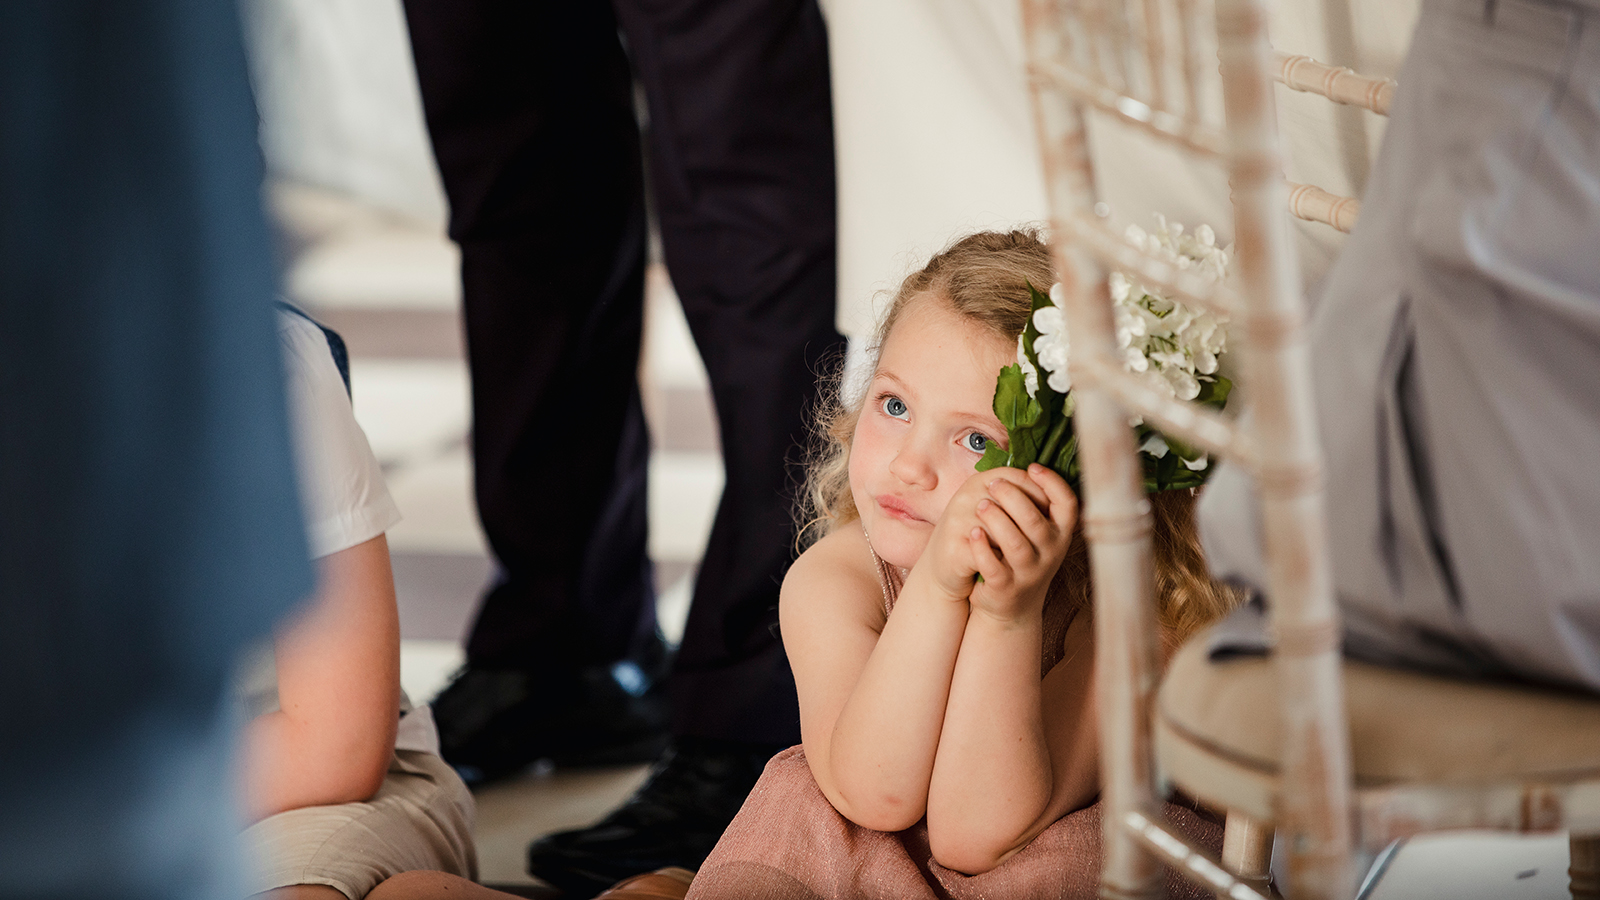 Little girl is sitting on the dancefloor by a table at a wedding. She is watching the bride and groom share their first dance.